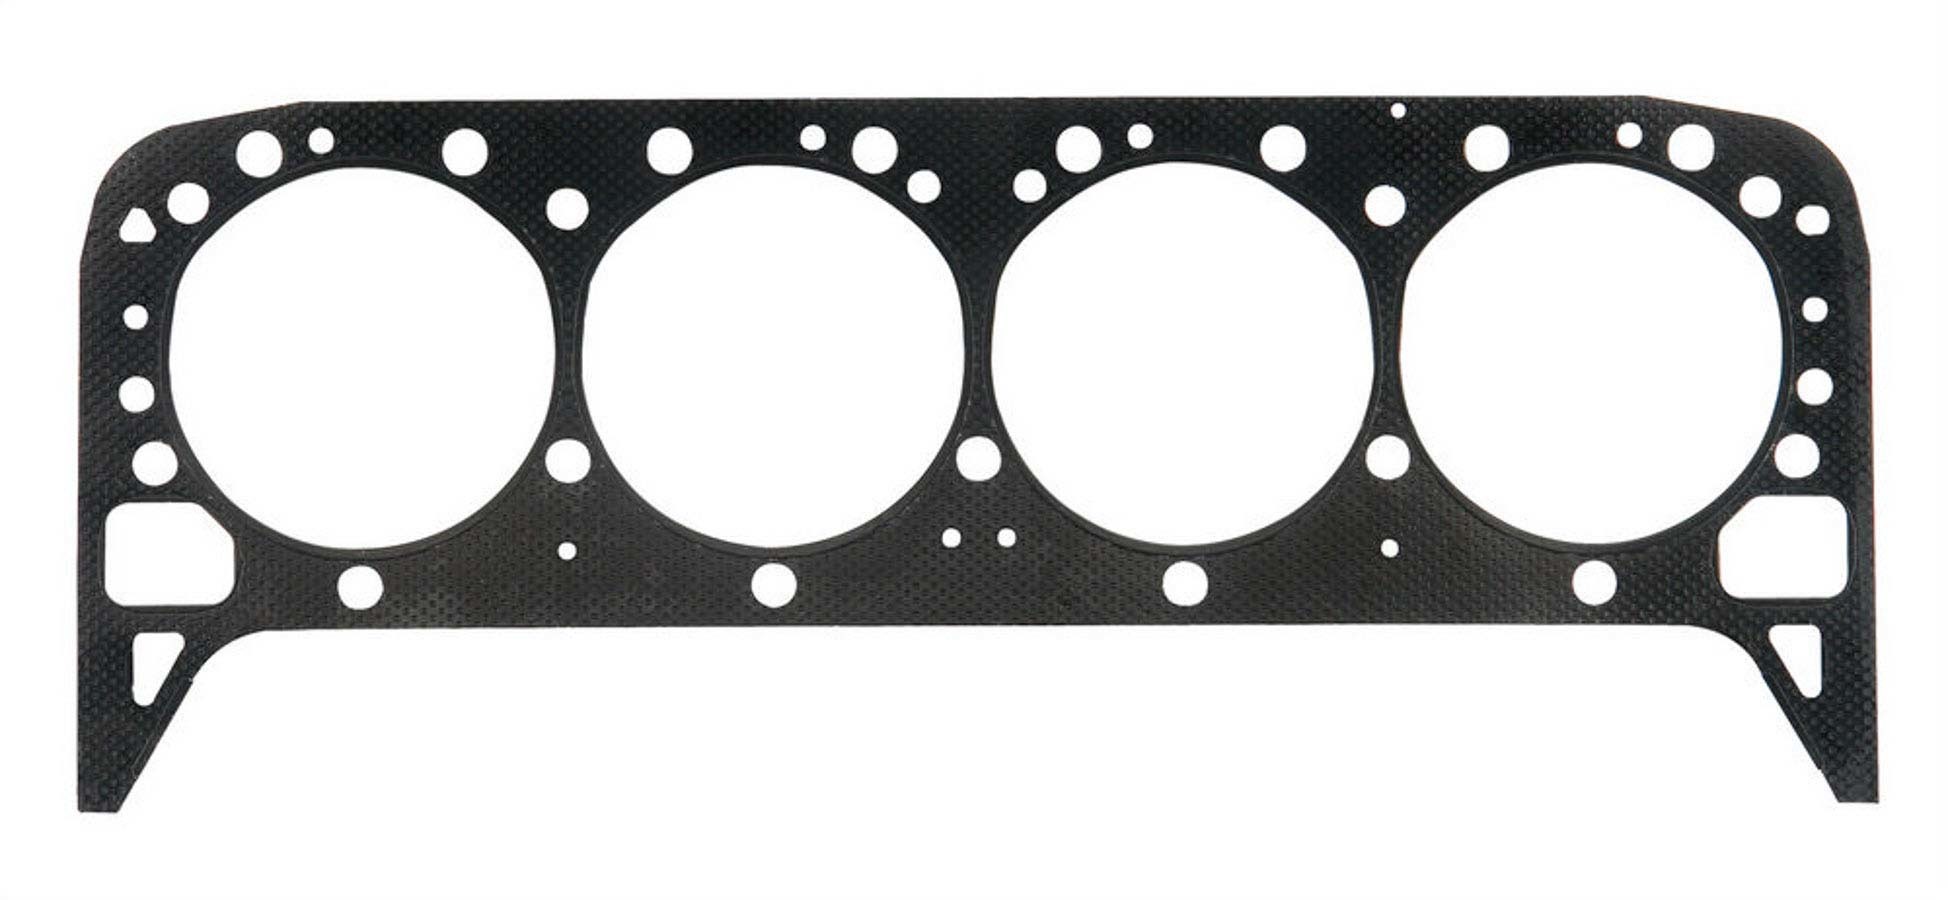 Mr. Gasket 5716G Cylinder Head Gasket, Ultra-Seal, 4.110 in Bore, 0.026 in Compression Thickness, Rubber Coated Steel / Graphite, GM LT-Series 1992-97, Each